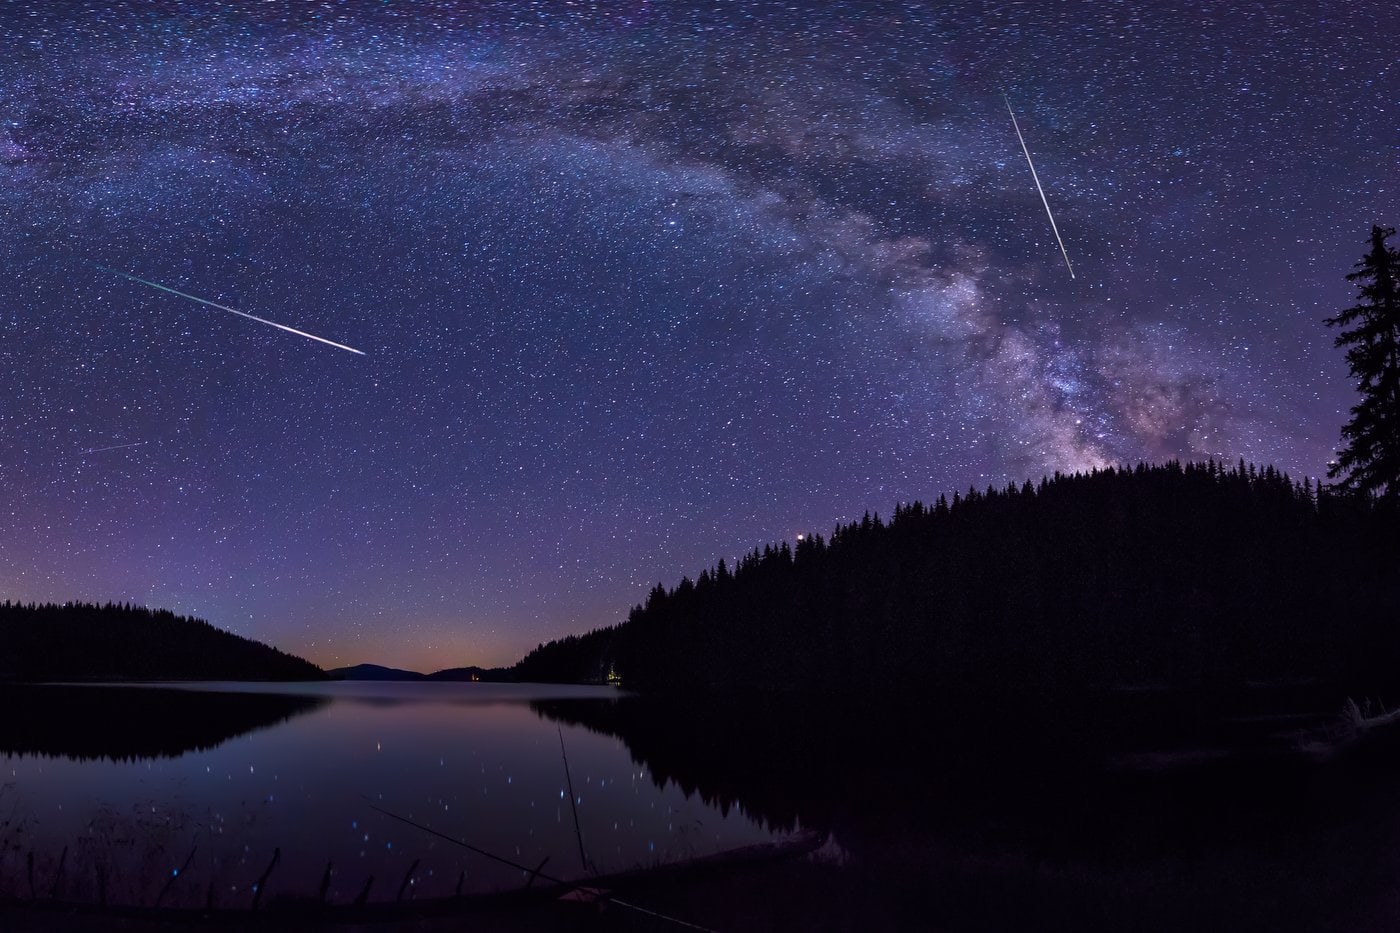 Milky Way and the Perseids